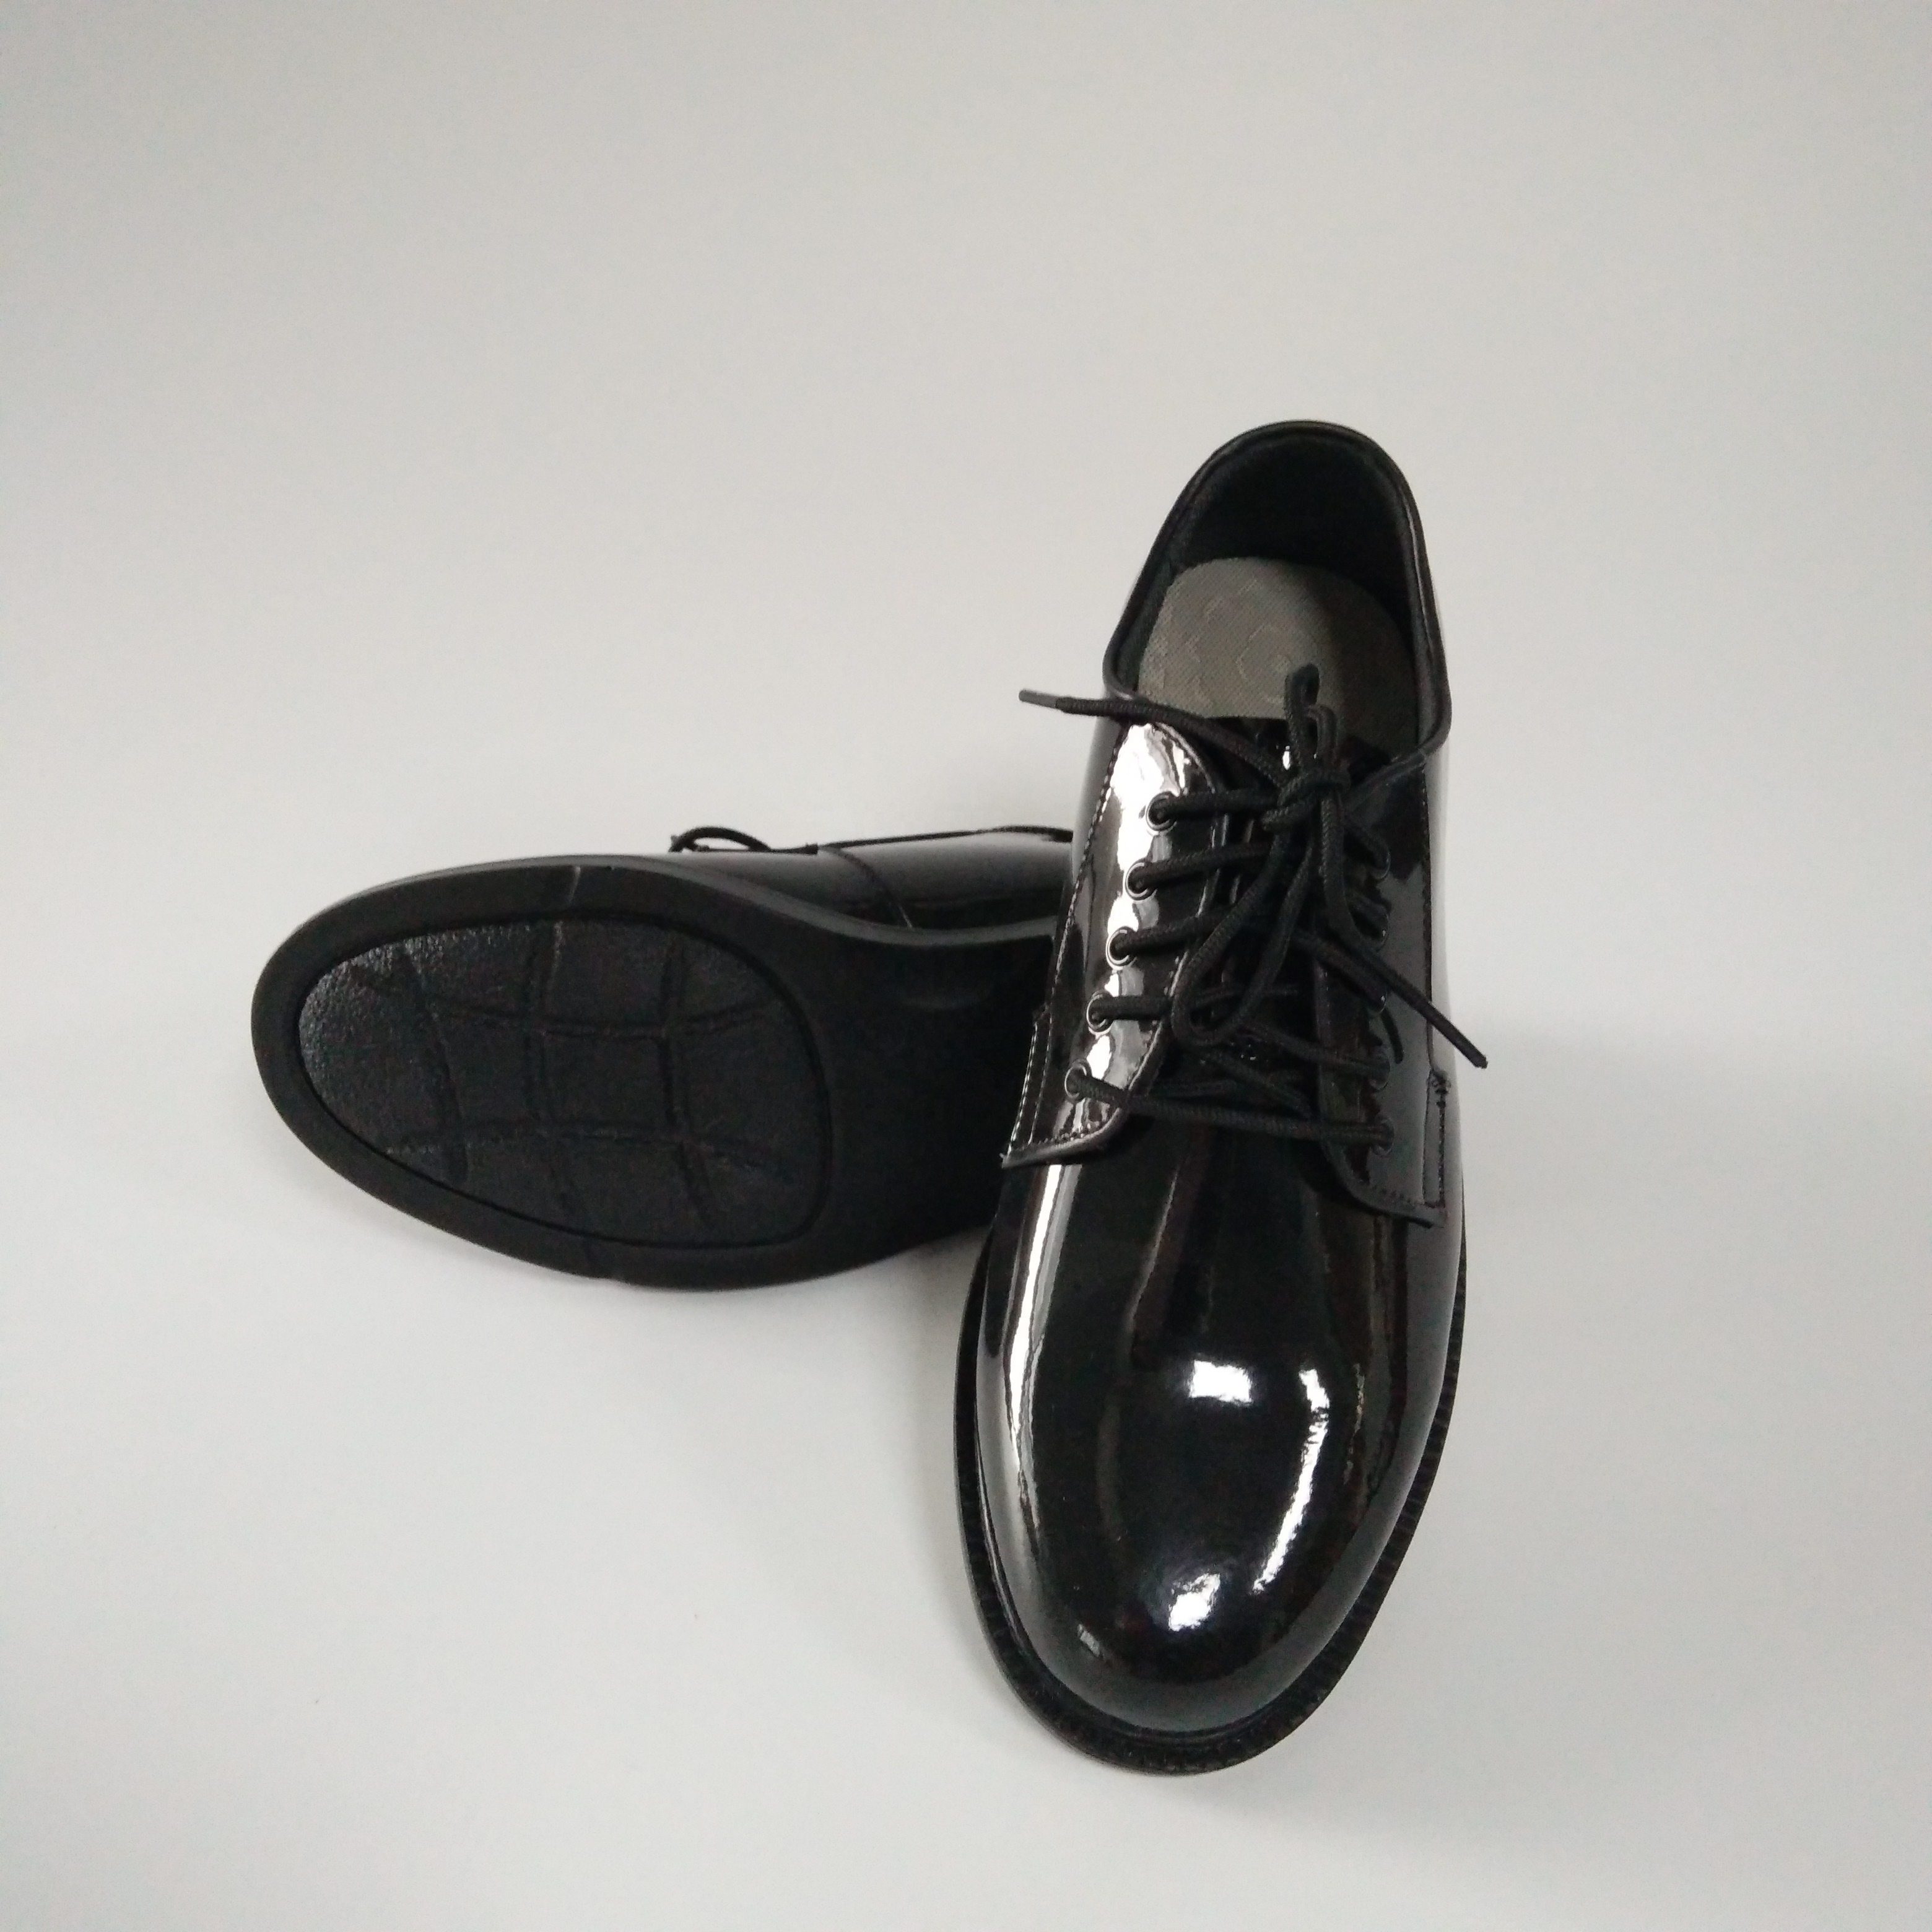 Black-Genuine-Leather-Office-Shoes-National-Ceremonial.jpg